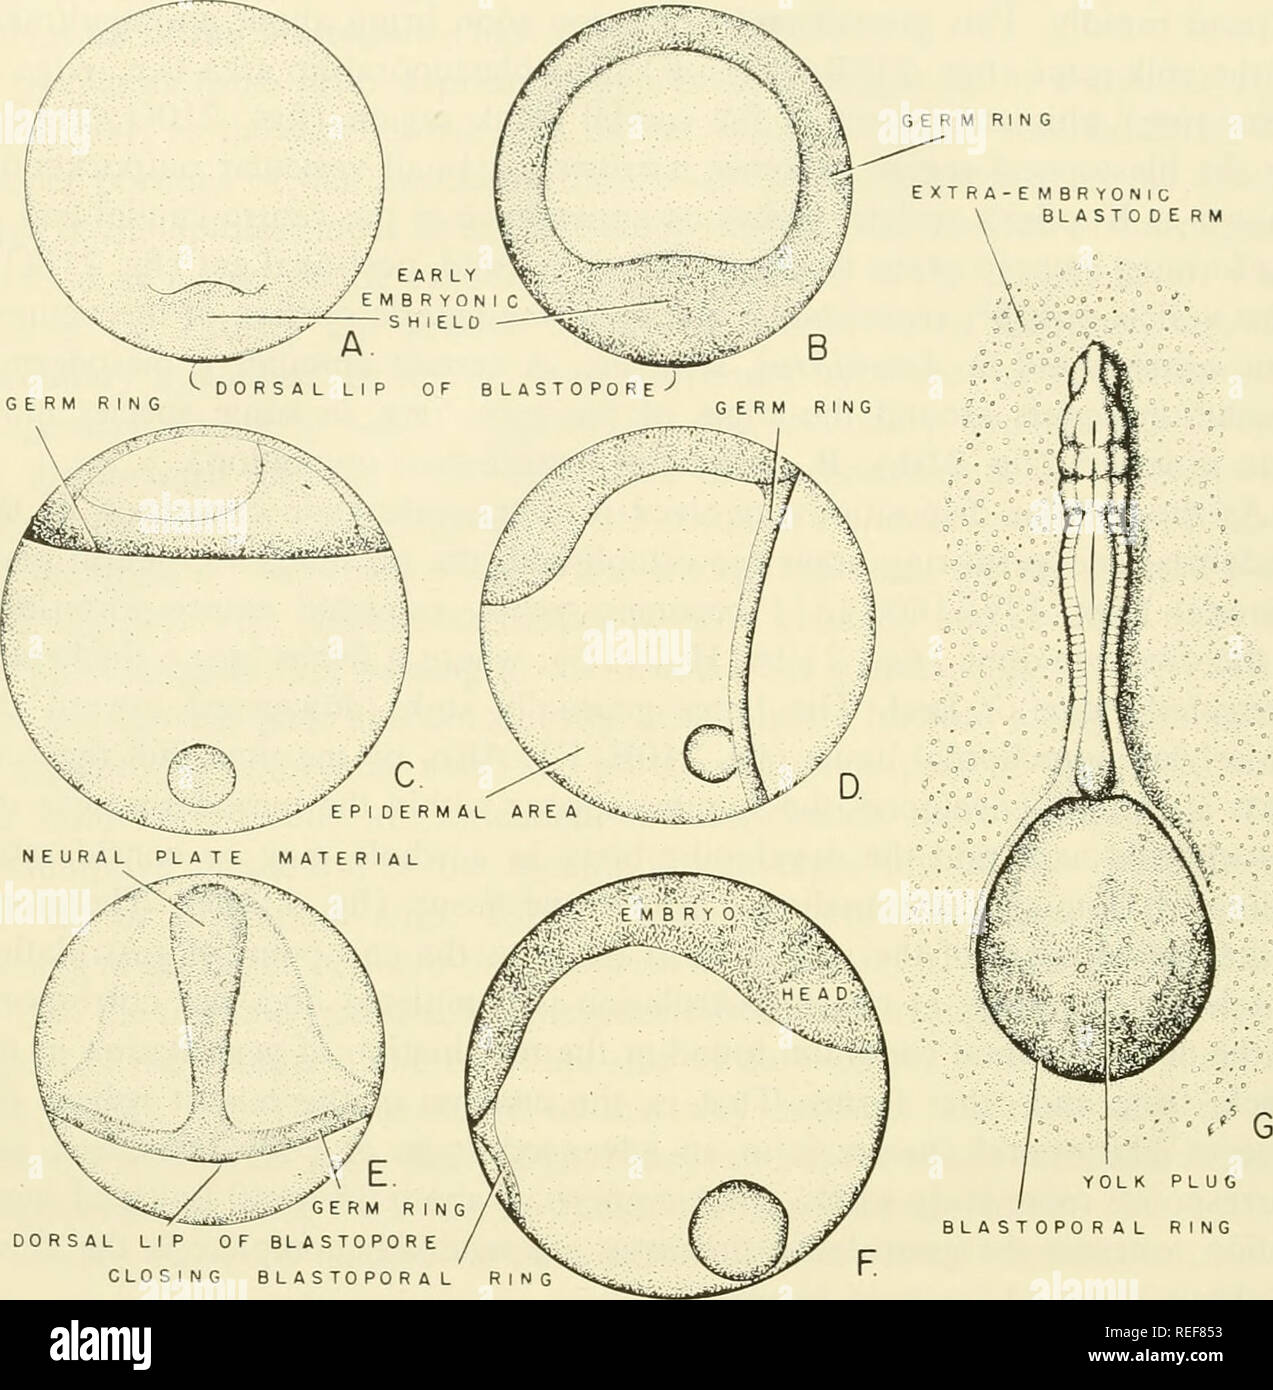 . Comparative embryology of the vertebrates; with 2057 drawings and photos. grouped as 380 illus. Vertebrates -- Embryology; Comparative embryology. 440 GASTRULATION GERM RING EXTRA-EMBRYONIC BLASTODERM. GERM RING DORSAL LIP OF BLASTOPORE CLOSING BLASTOPORAL RING Fig. 211. Gastrulation in teleost fishes. (A-F after Wilson, 1889; G from Kerr, '19, after Kopsch.) (A) Sea bass. 16 hours, embryonic shield becoming evident, marks beginning of germ ring. (B) Germ ring well developed. Surface view of blastoderm of 20 hours. (C) Side view of blastoderm shown in (B). (D) Side view, 25 hours. (E) Surfac Stock Photo